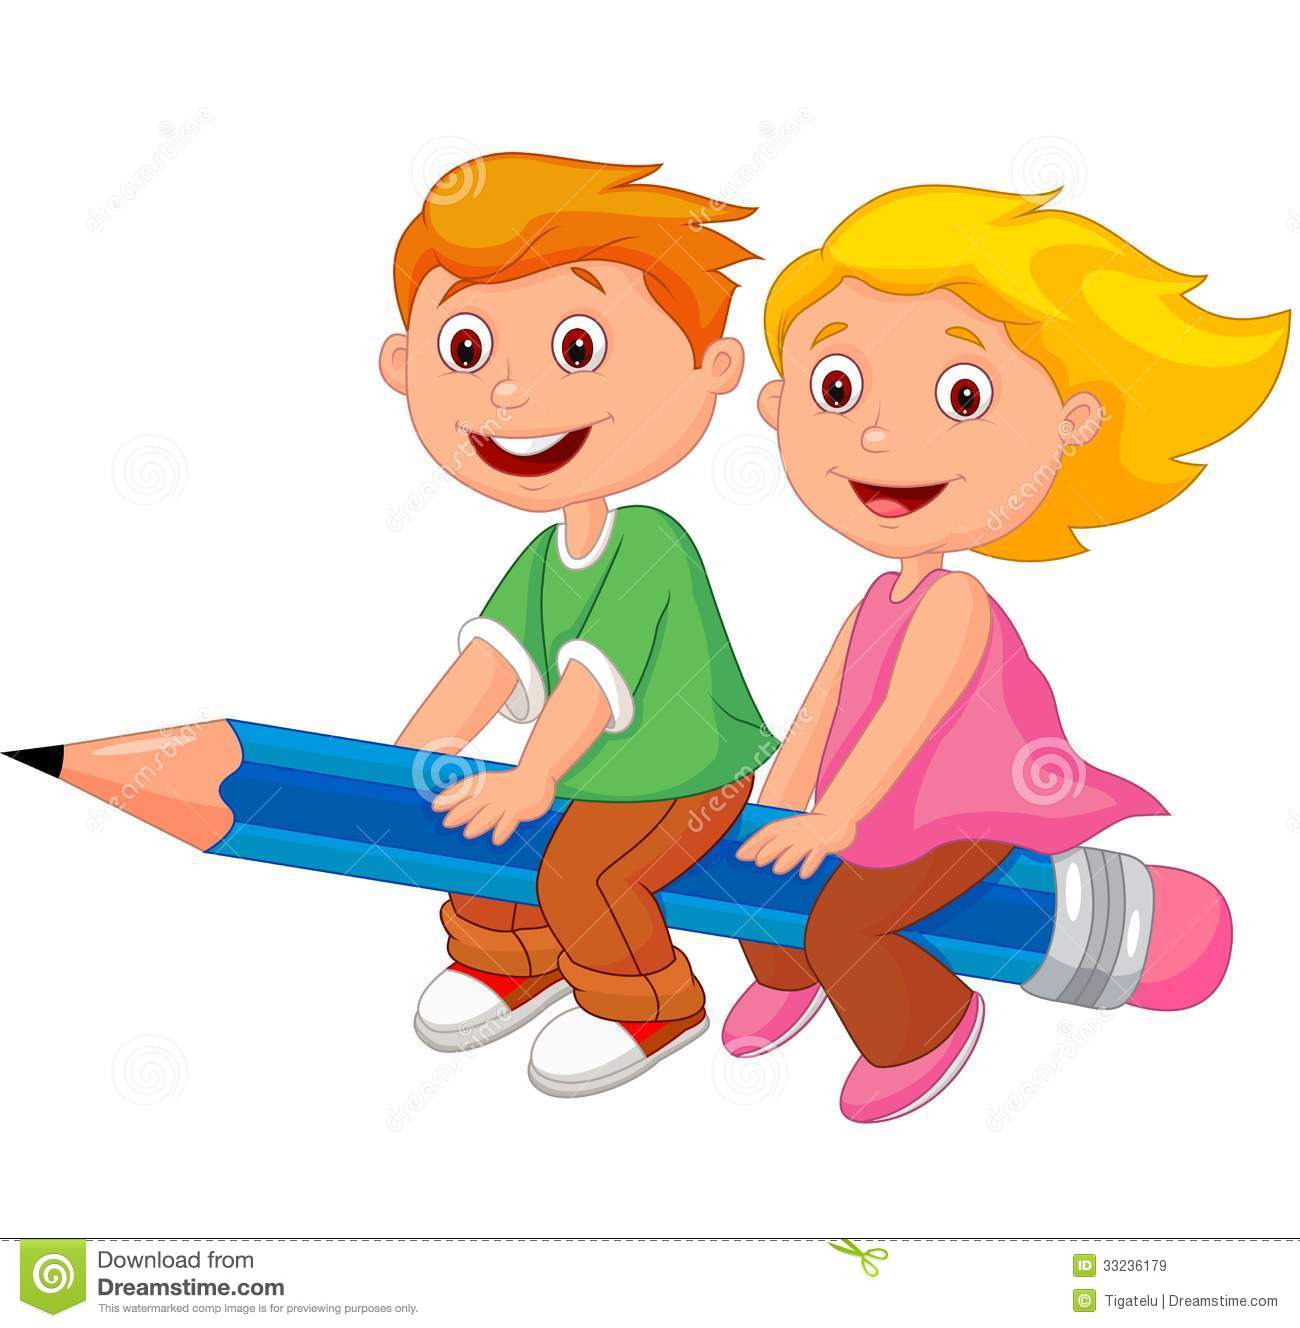 Cartoon Boy And Girl Flying On A Pencil Royalty Free Stock Images